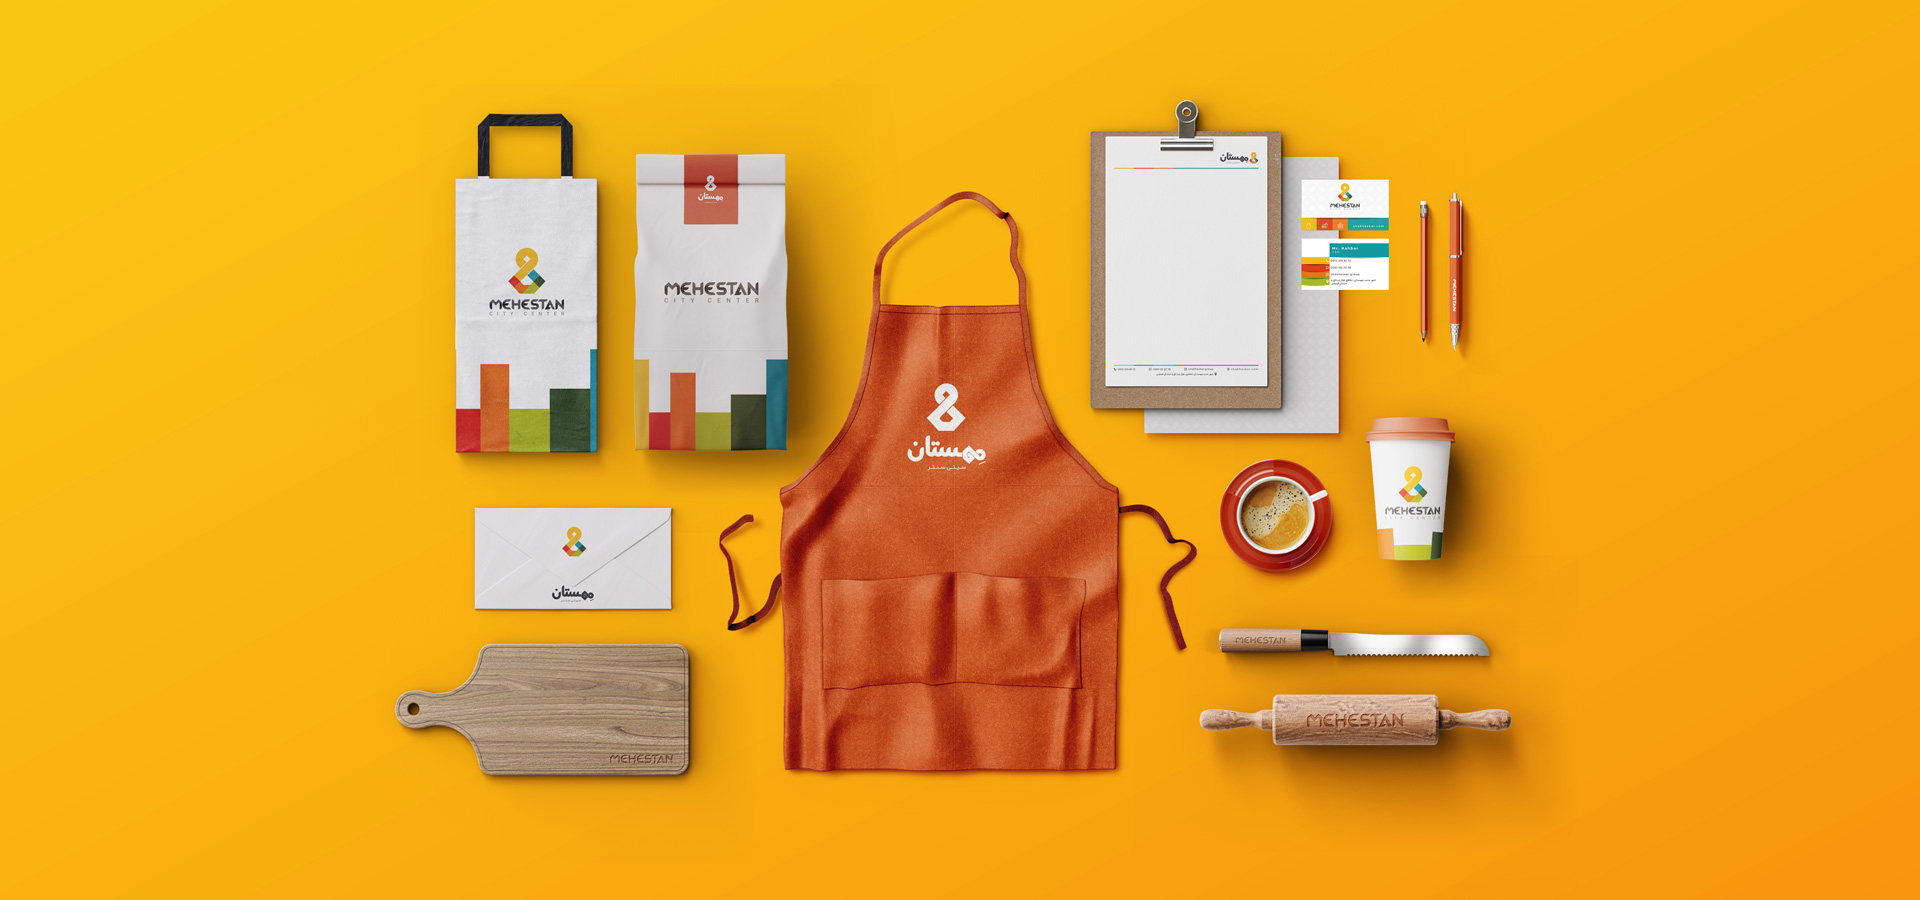 Corporate Visual Identity Design brand design project of Mehestan Brand by Zhahoo Creative Agency.